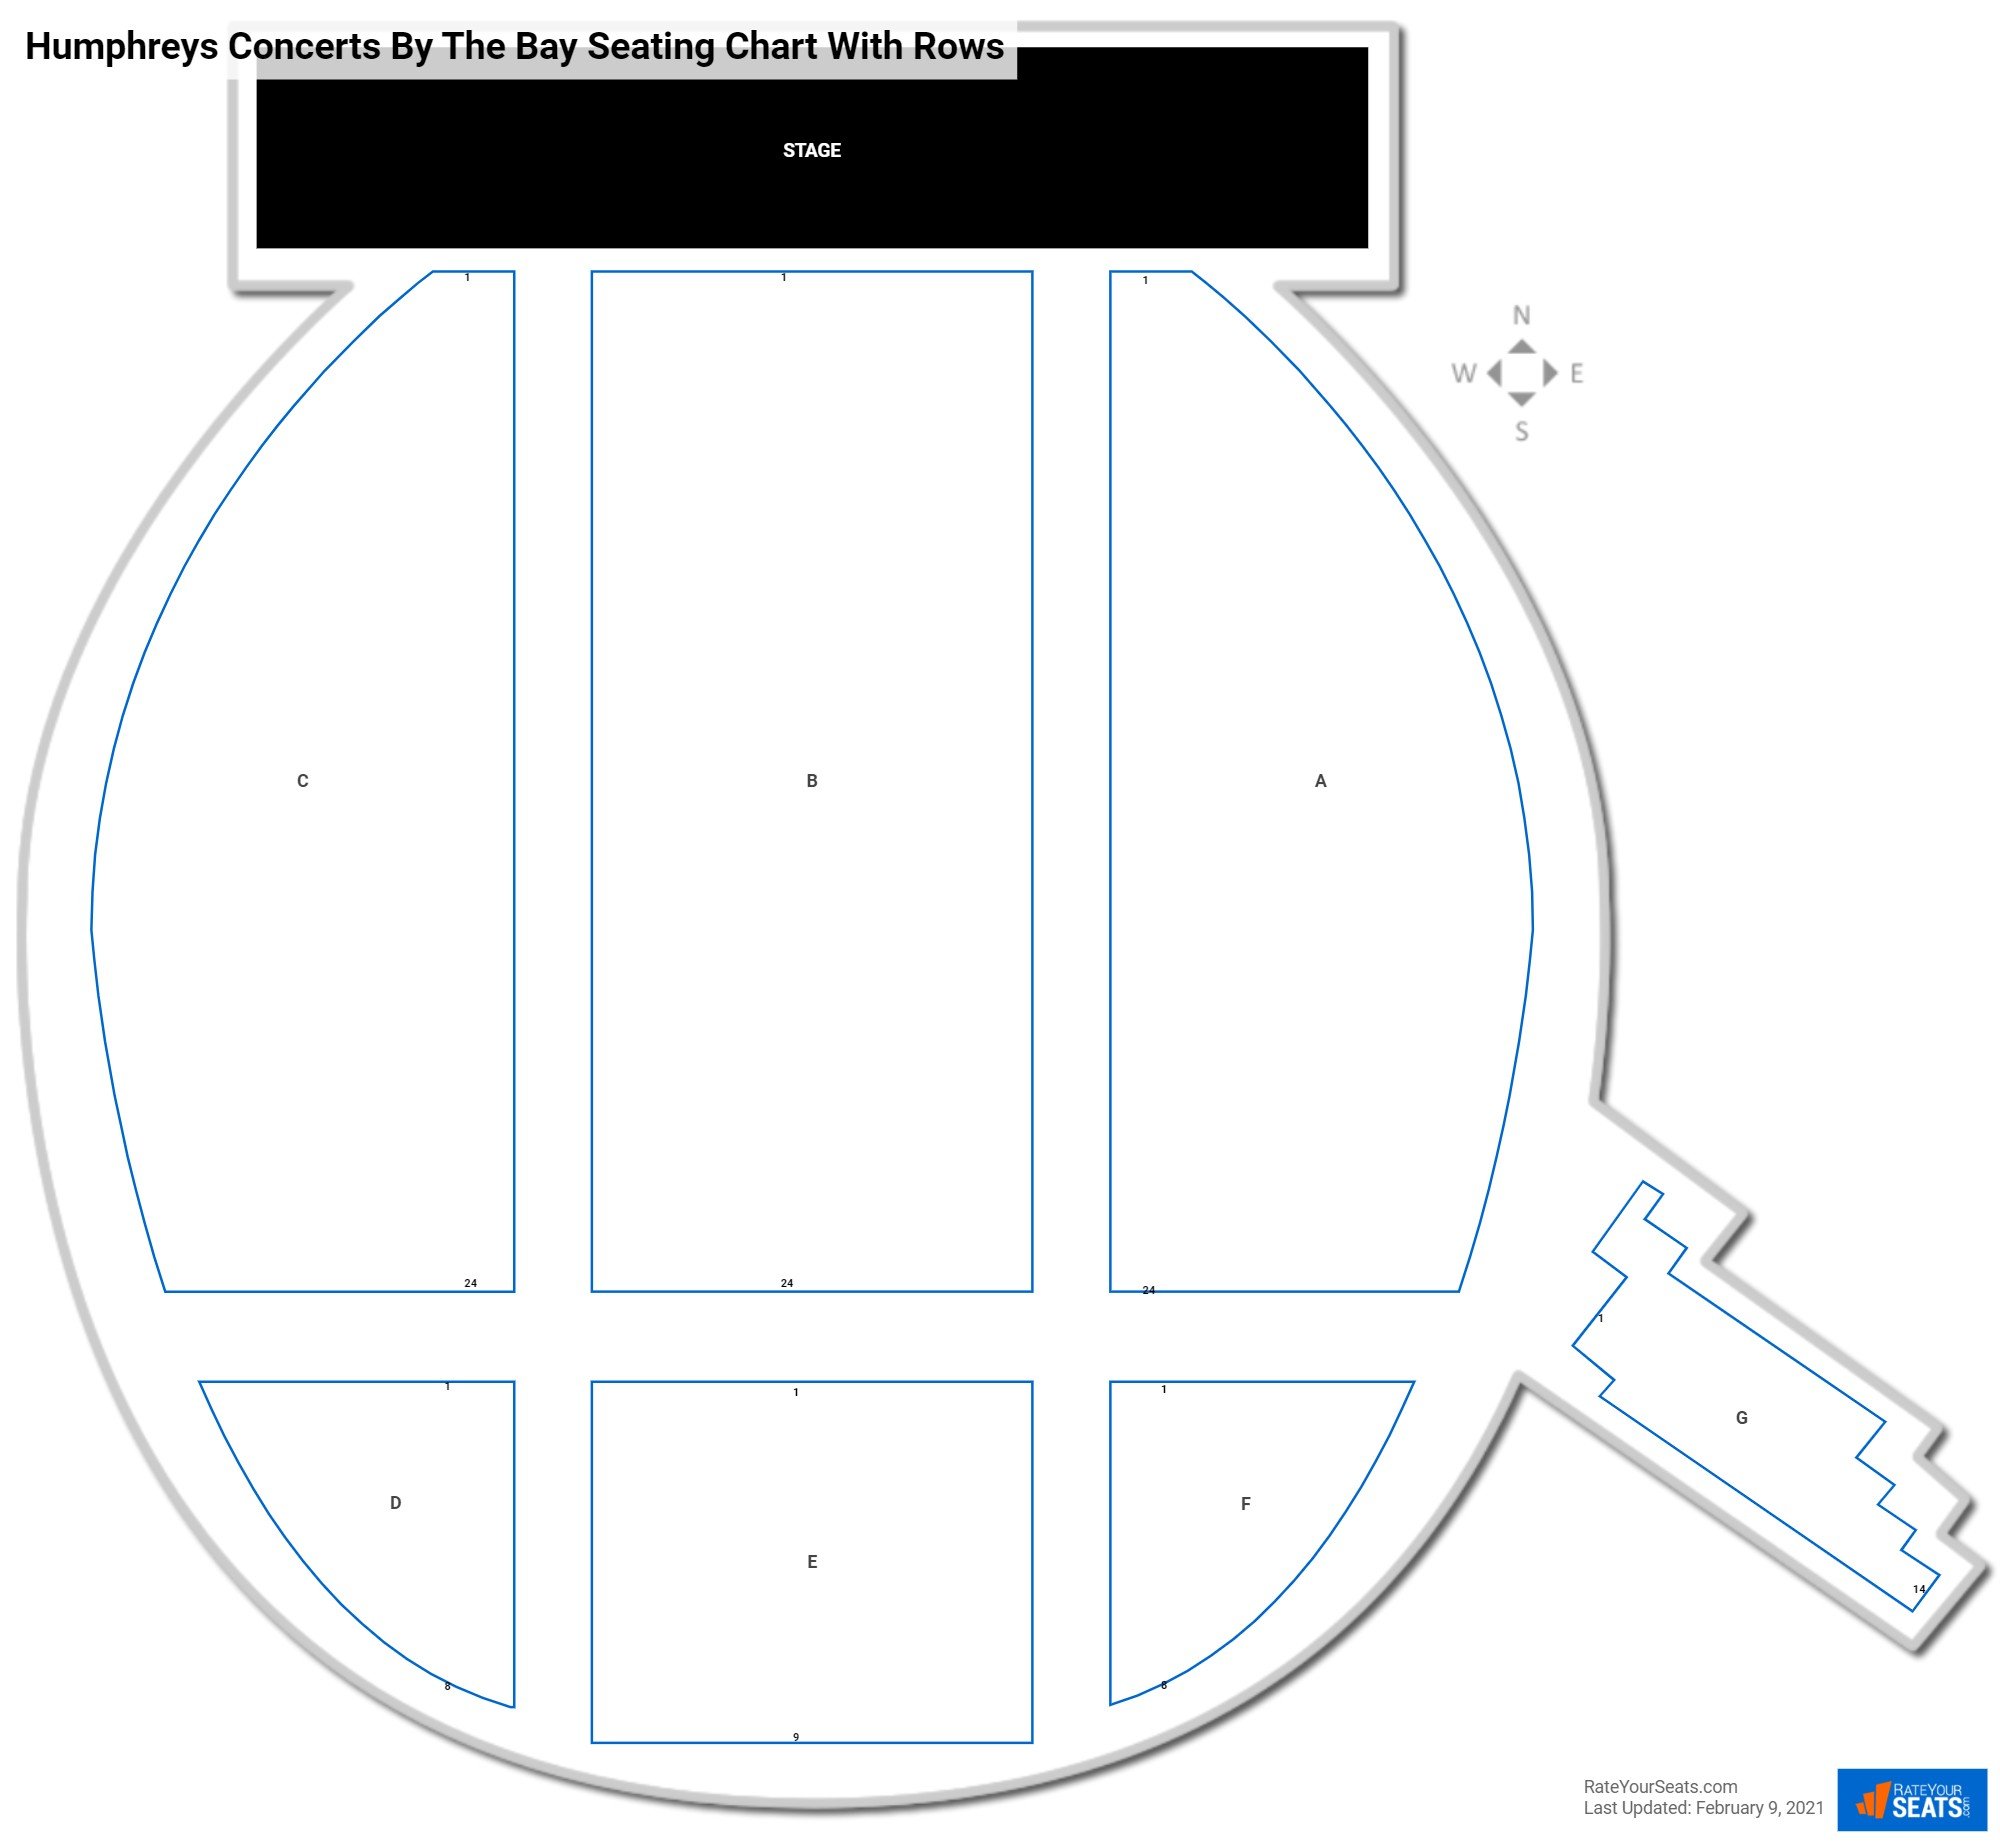 Humphreys Concerts By The Bay seating chart with row numbers